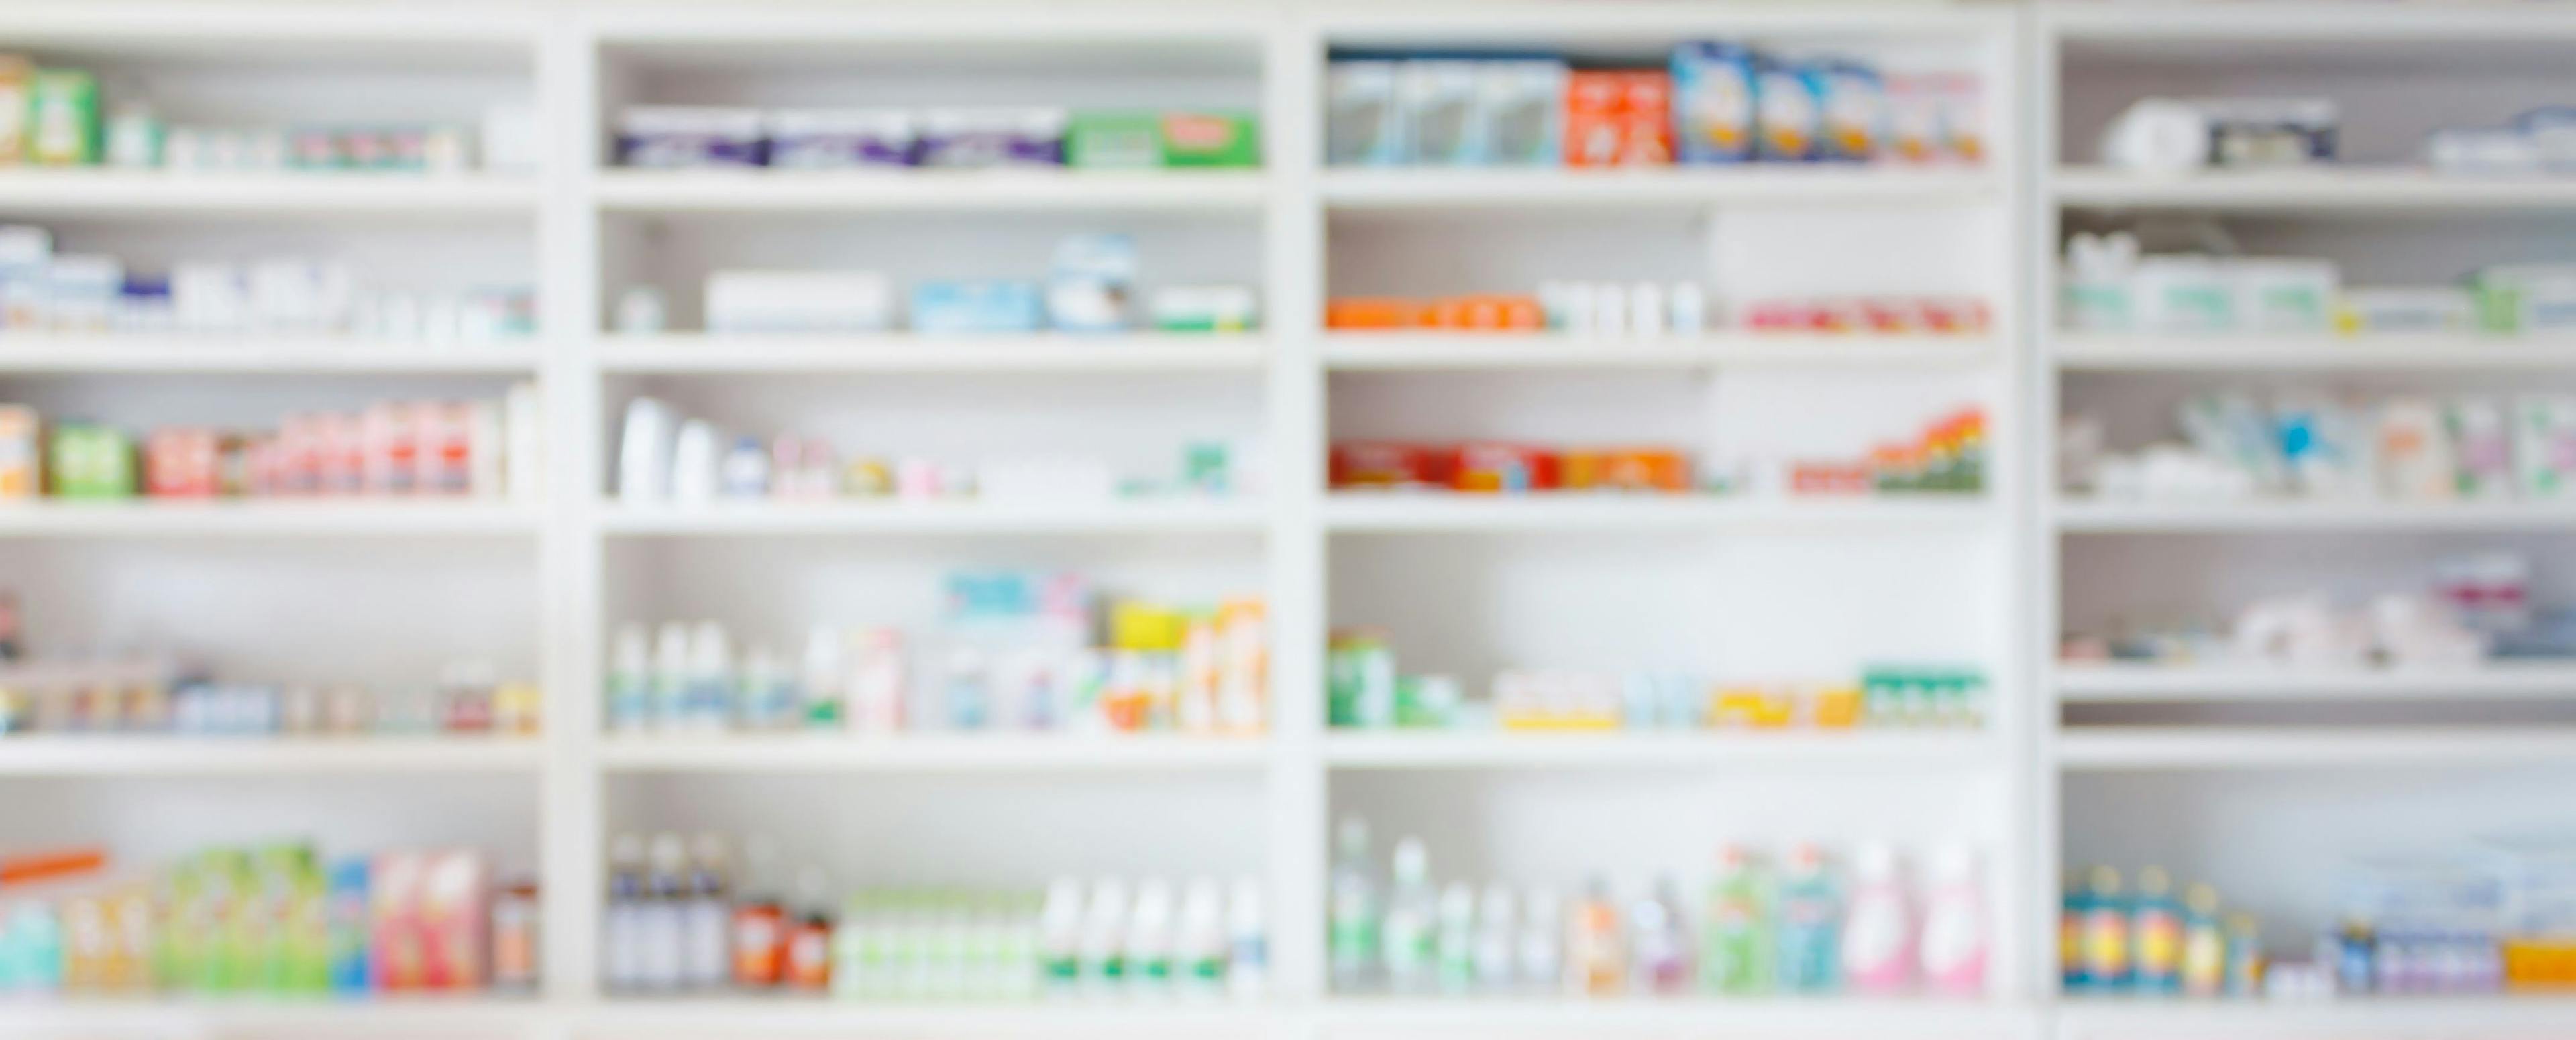 Pharmacy drugstore blur abstract background with medicine and healthcare product on shelves | Image credit: Piman Khrutmuang - stock.adobe.com 